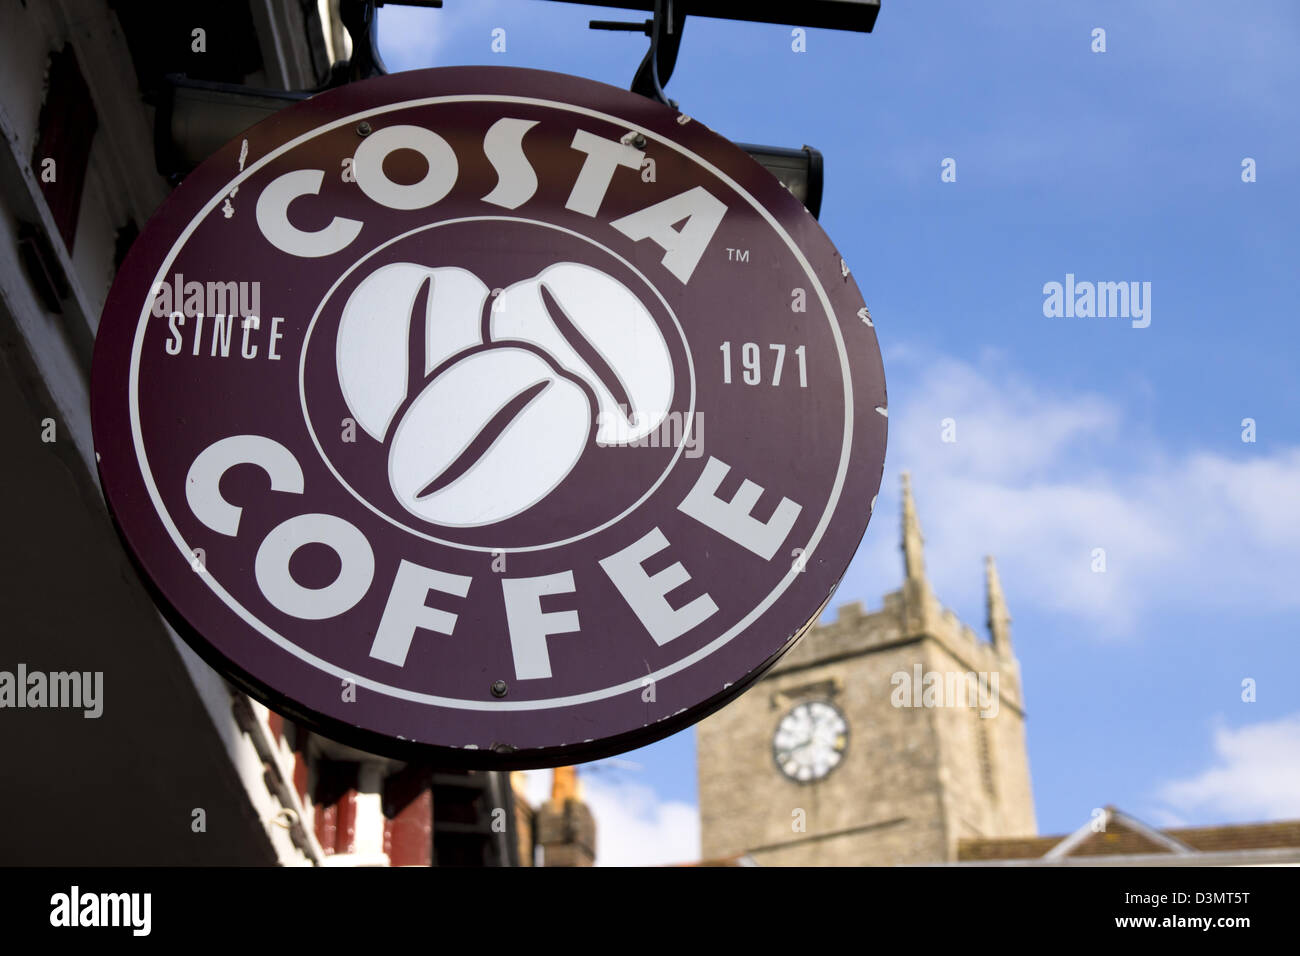 Marlborough is a small market town in the wiltshire countryside, England UK. the Costa Coffee shop. Stock Photo